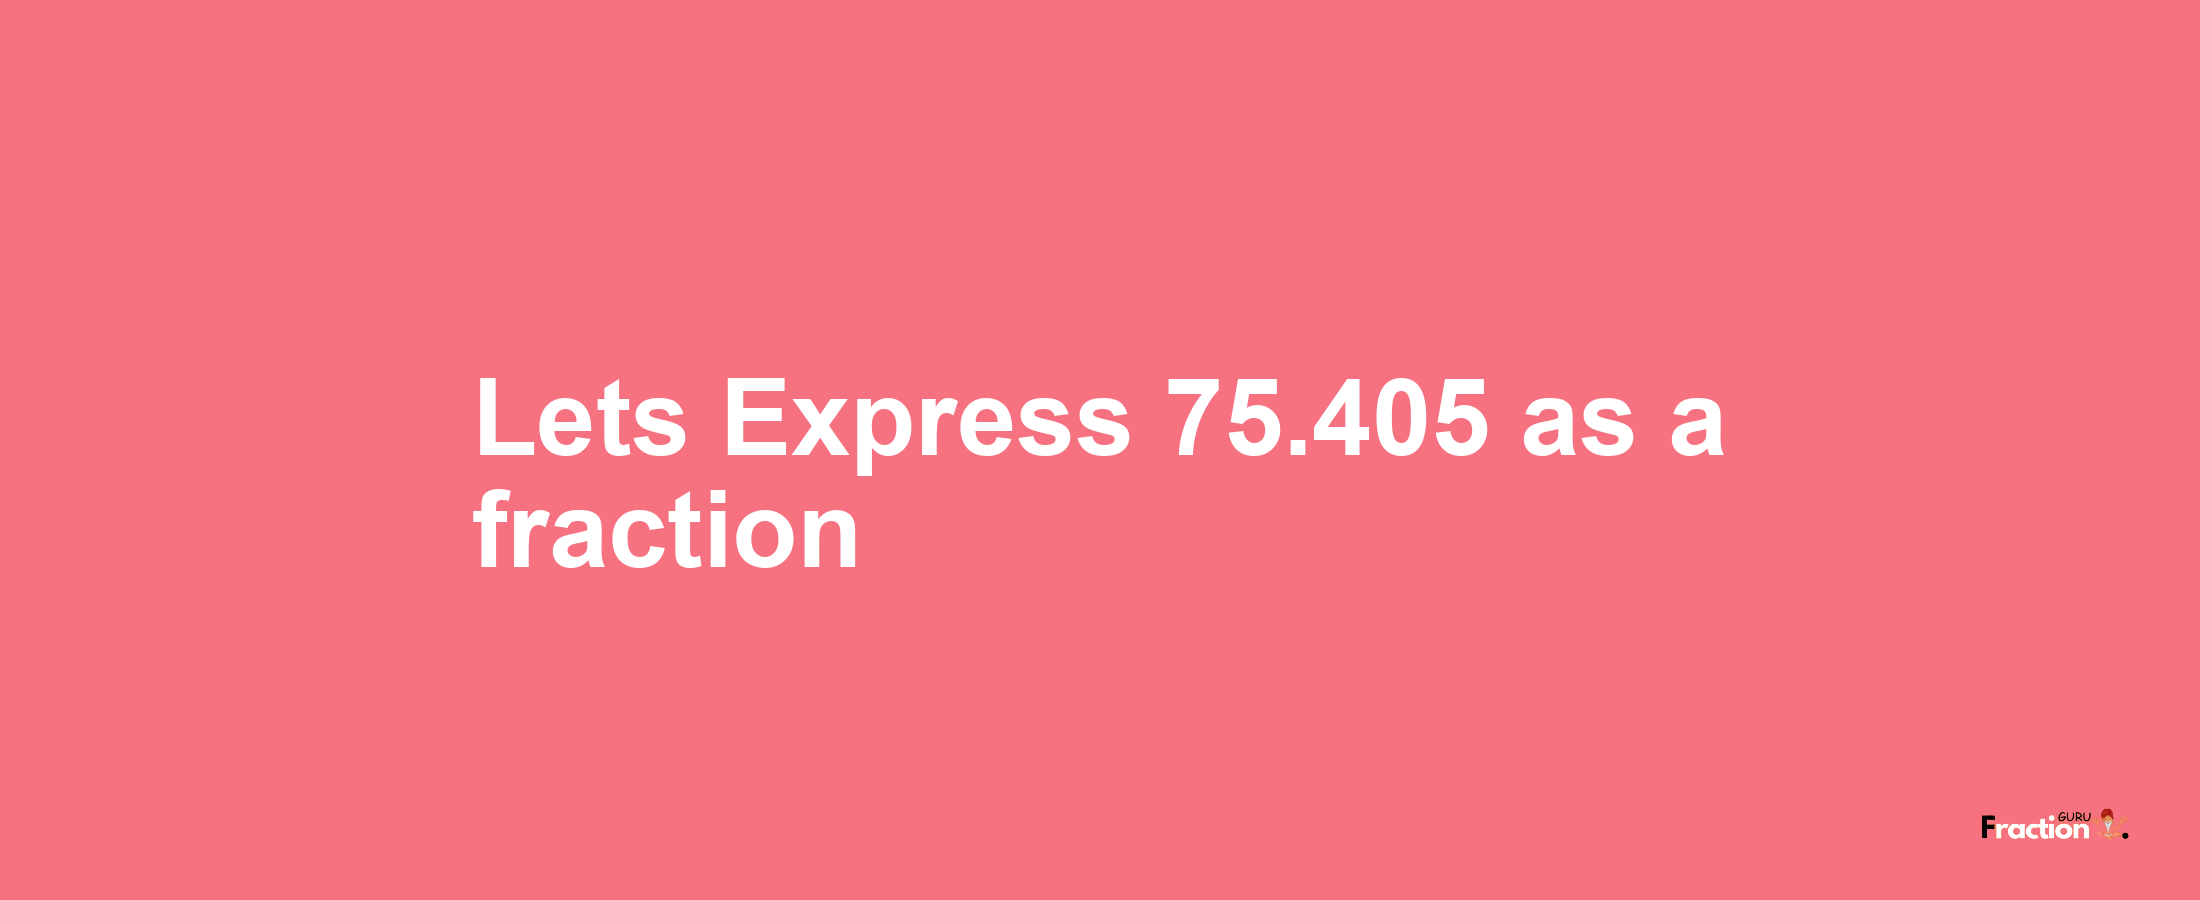 Lets Express 75.405 as afraction